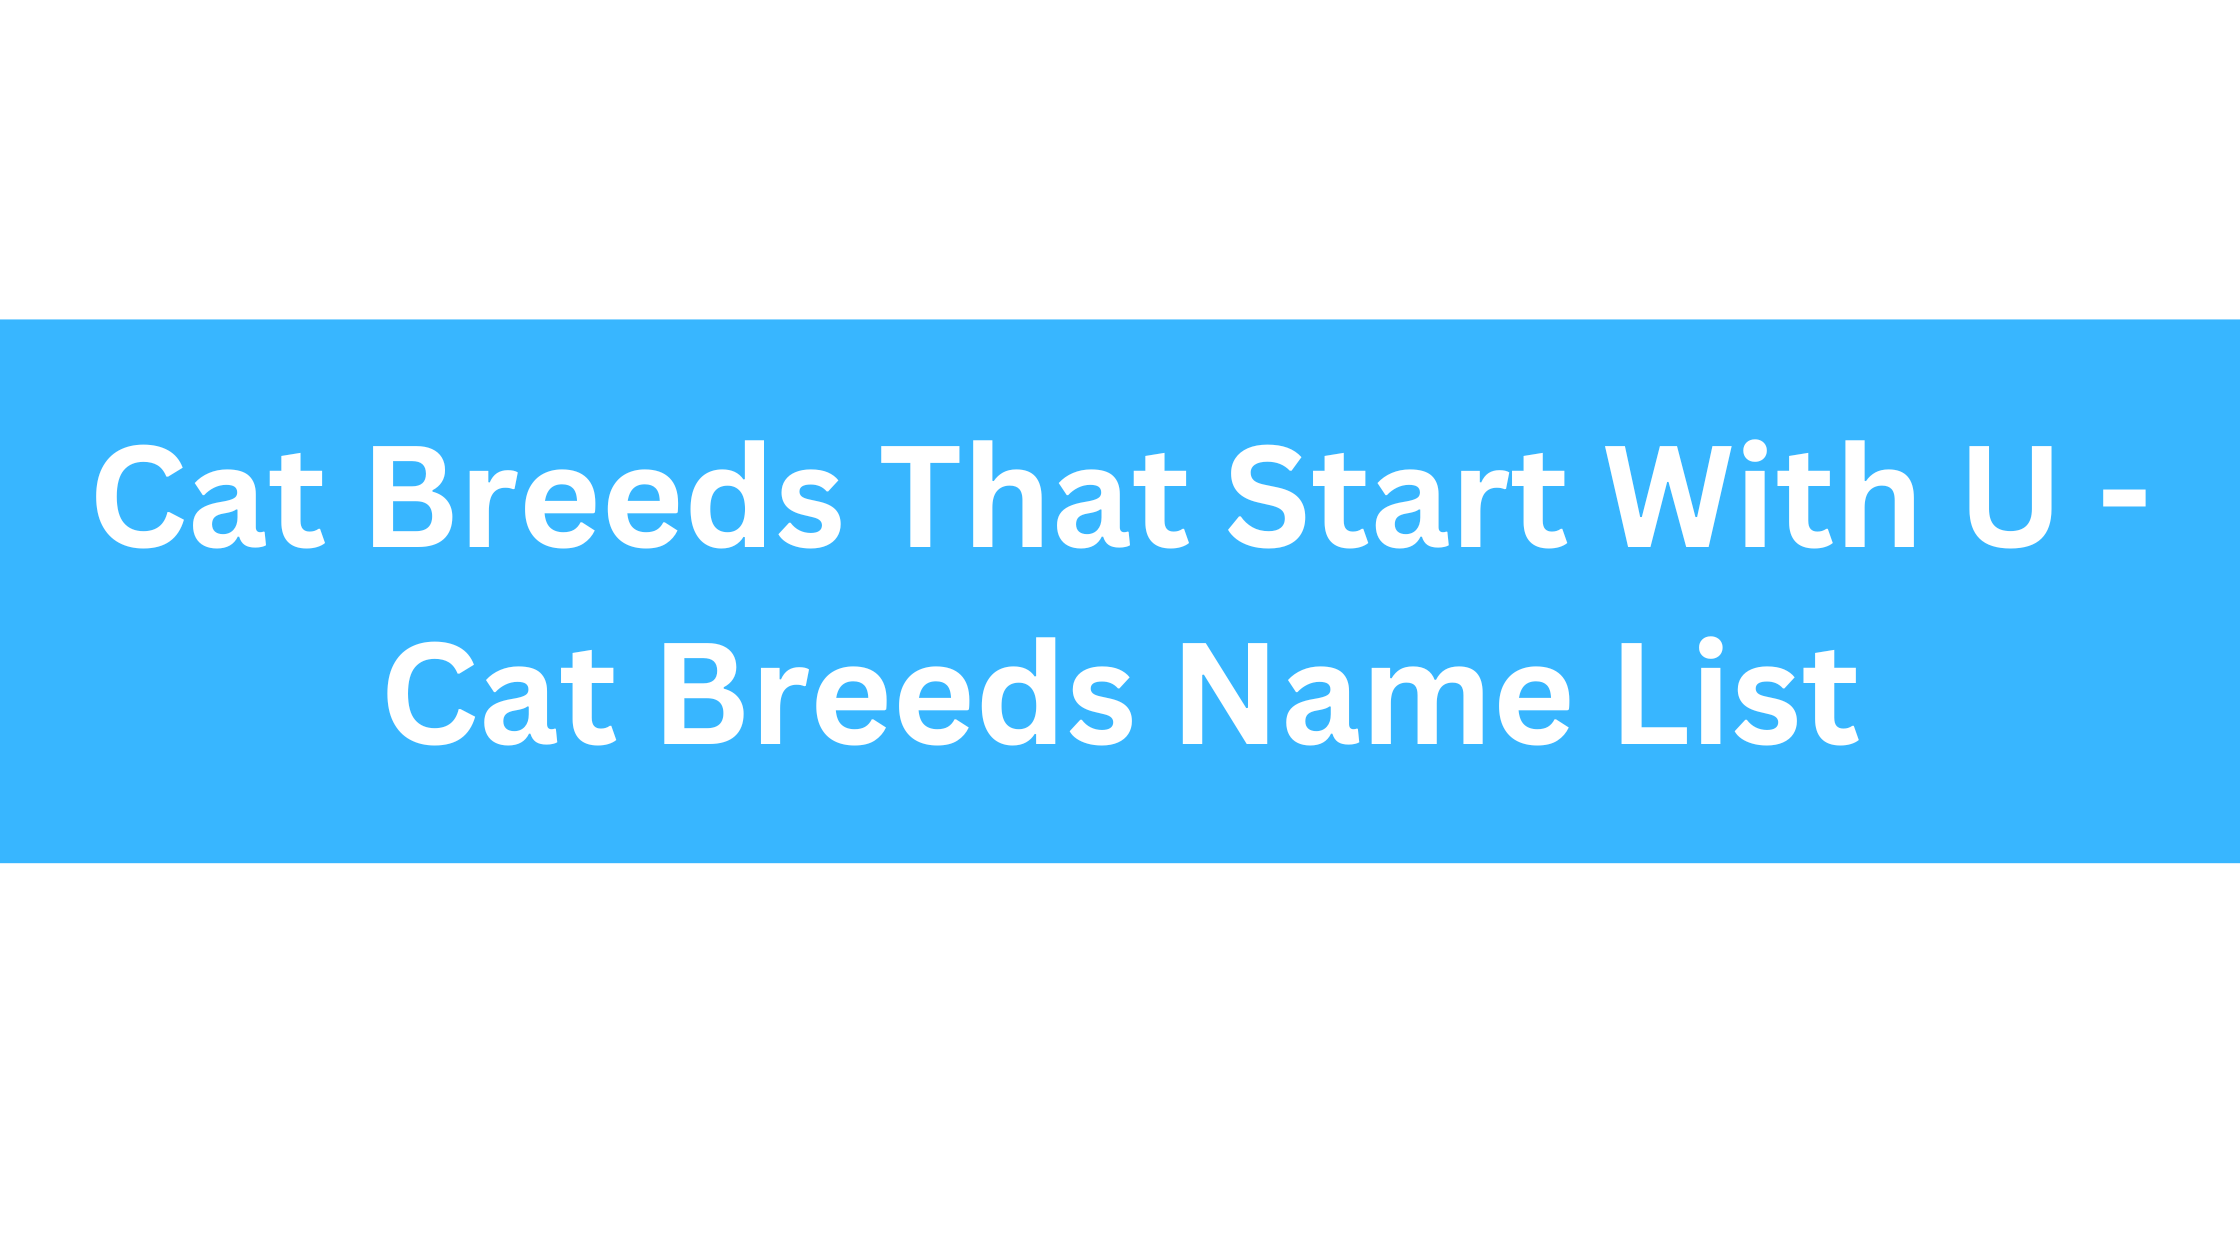 Cat Breeds That Start With U